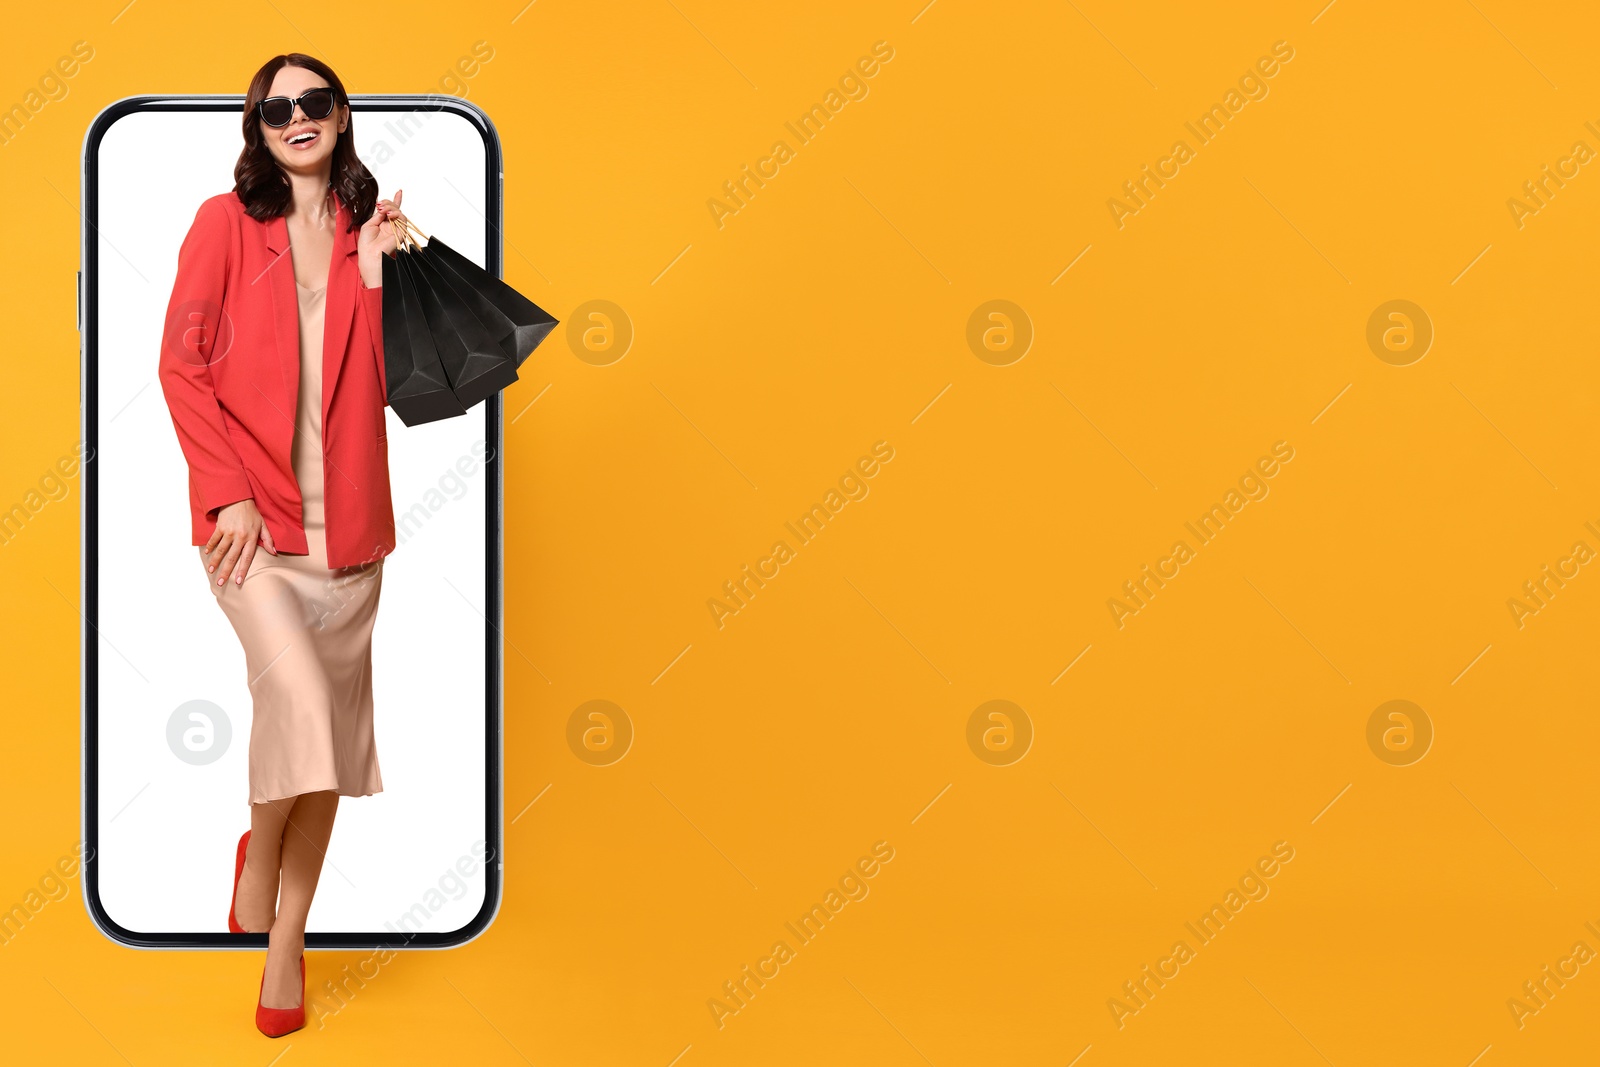 Image of Online shopping. Happy woman with paper bags walking out from smartphone on orange background, space for text